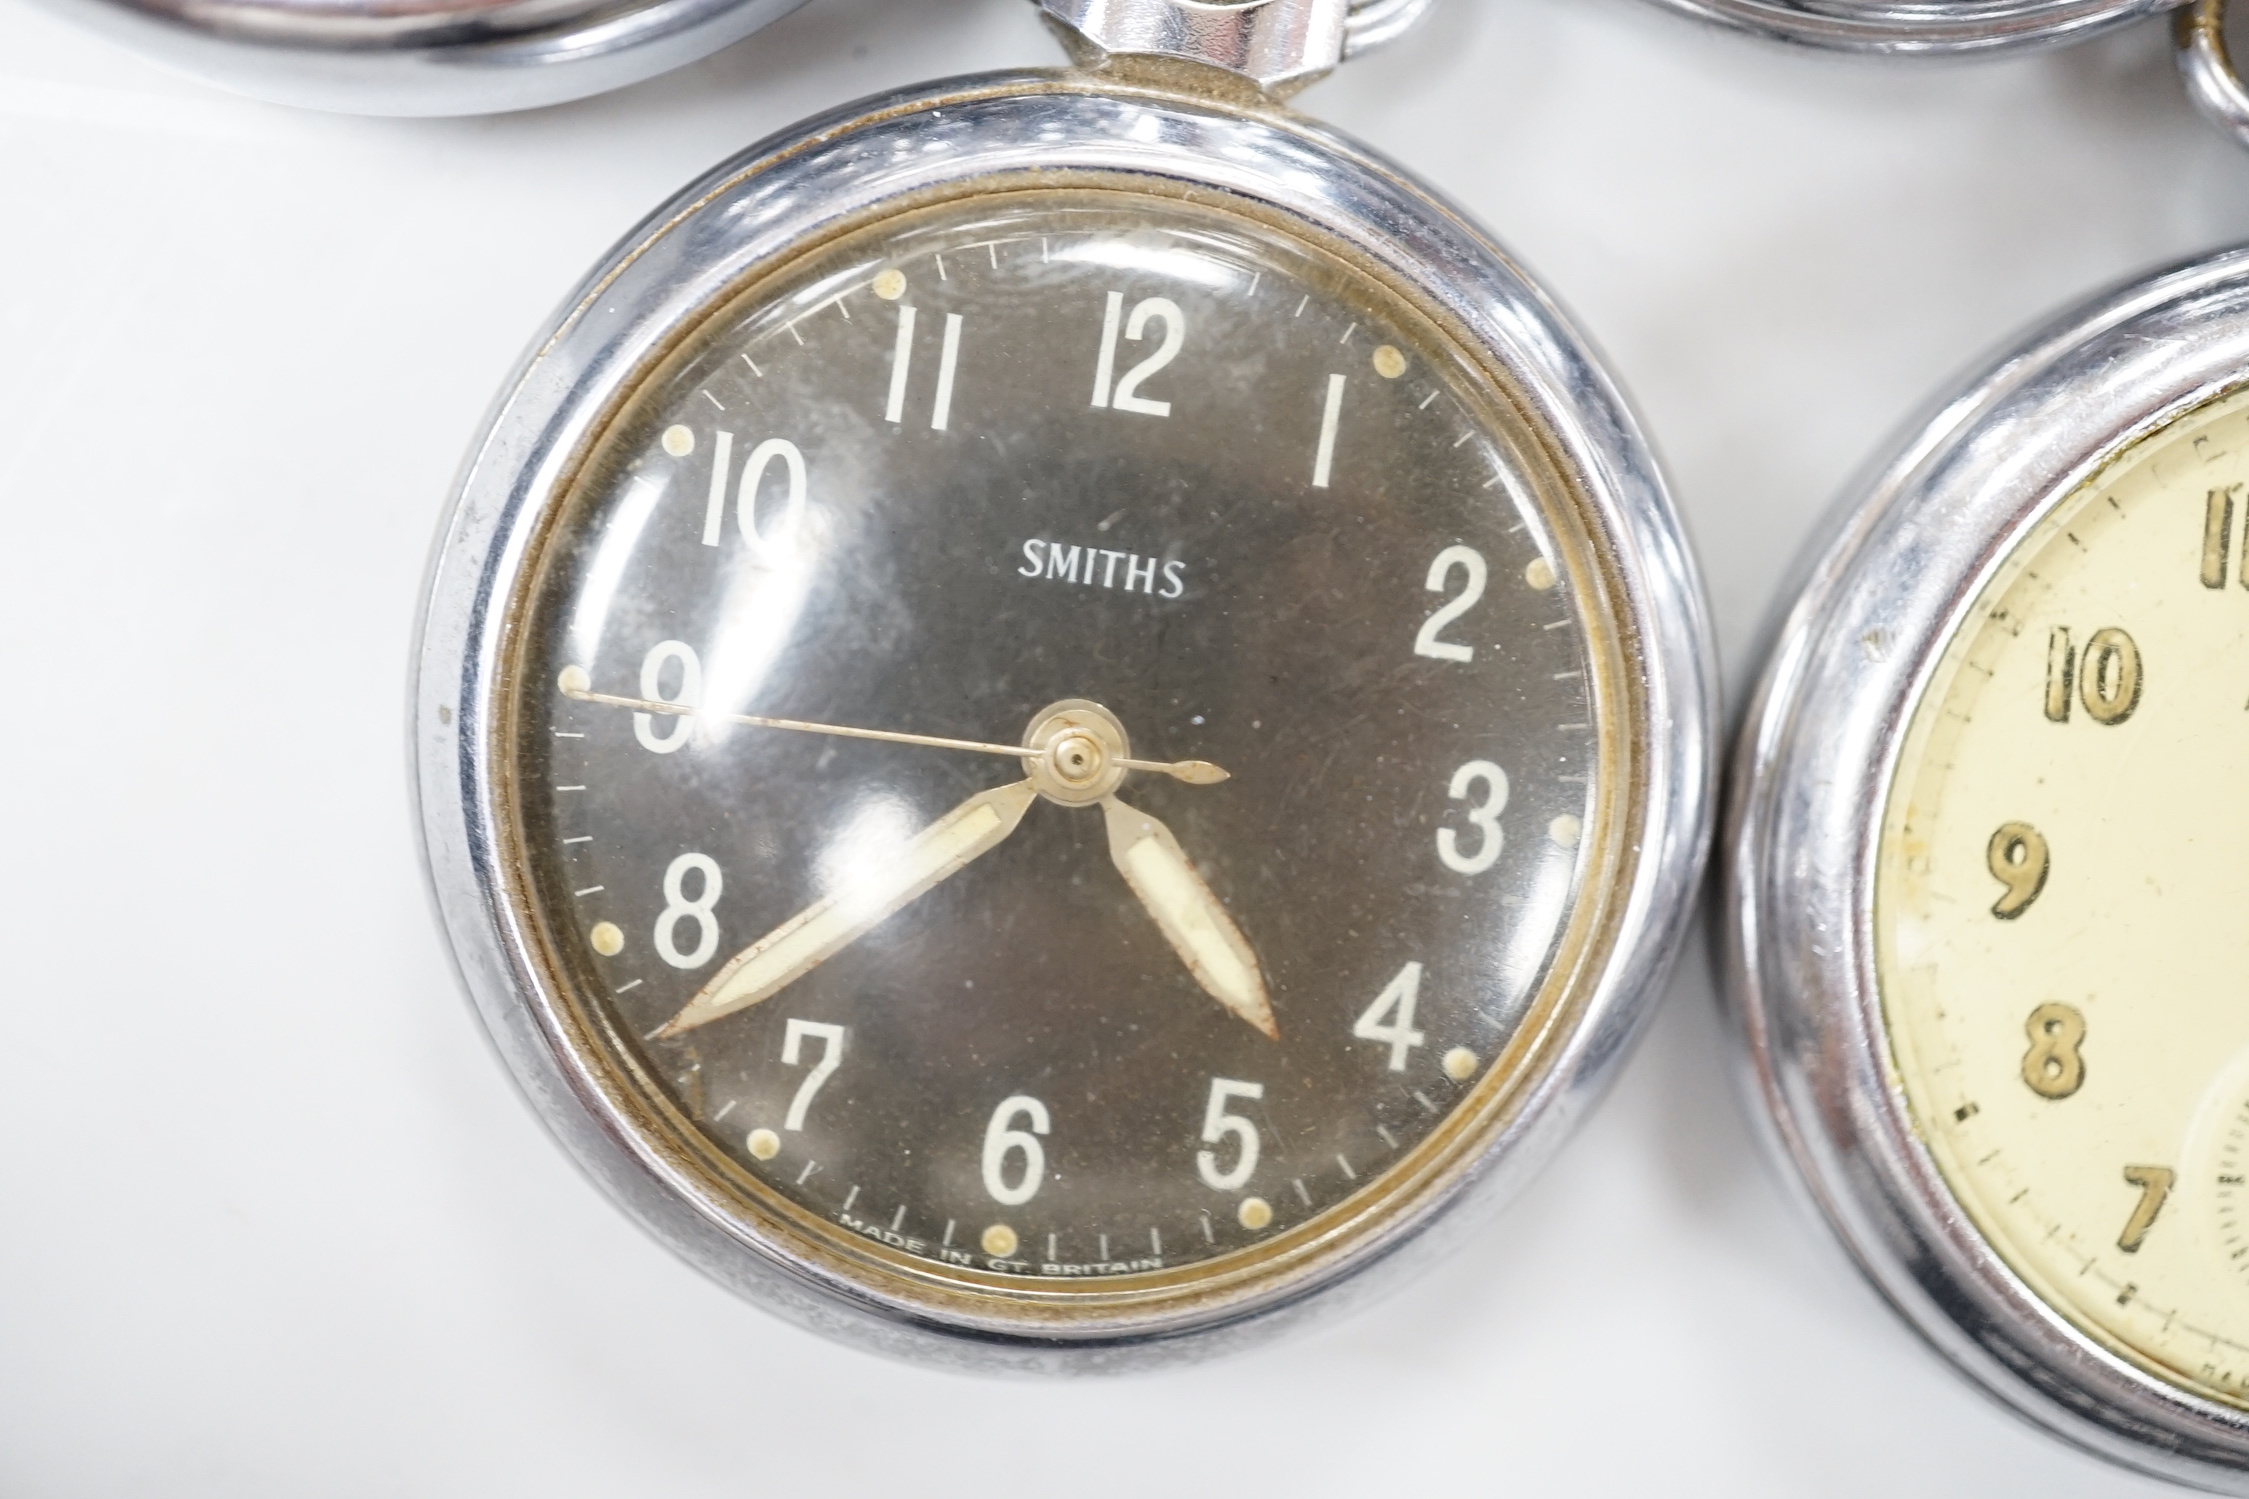 Ten assorted base metal pocket watches including Ingersoll, Services Excel and Smiths.